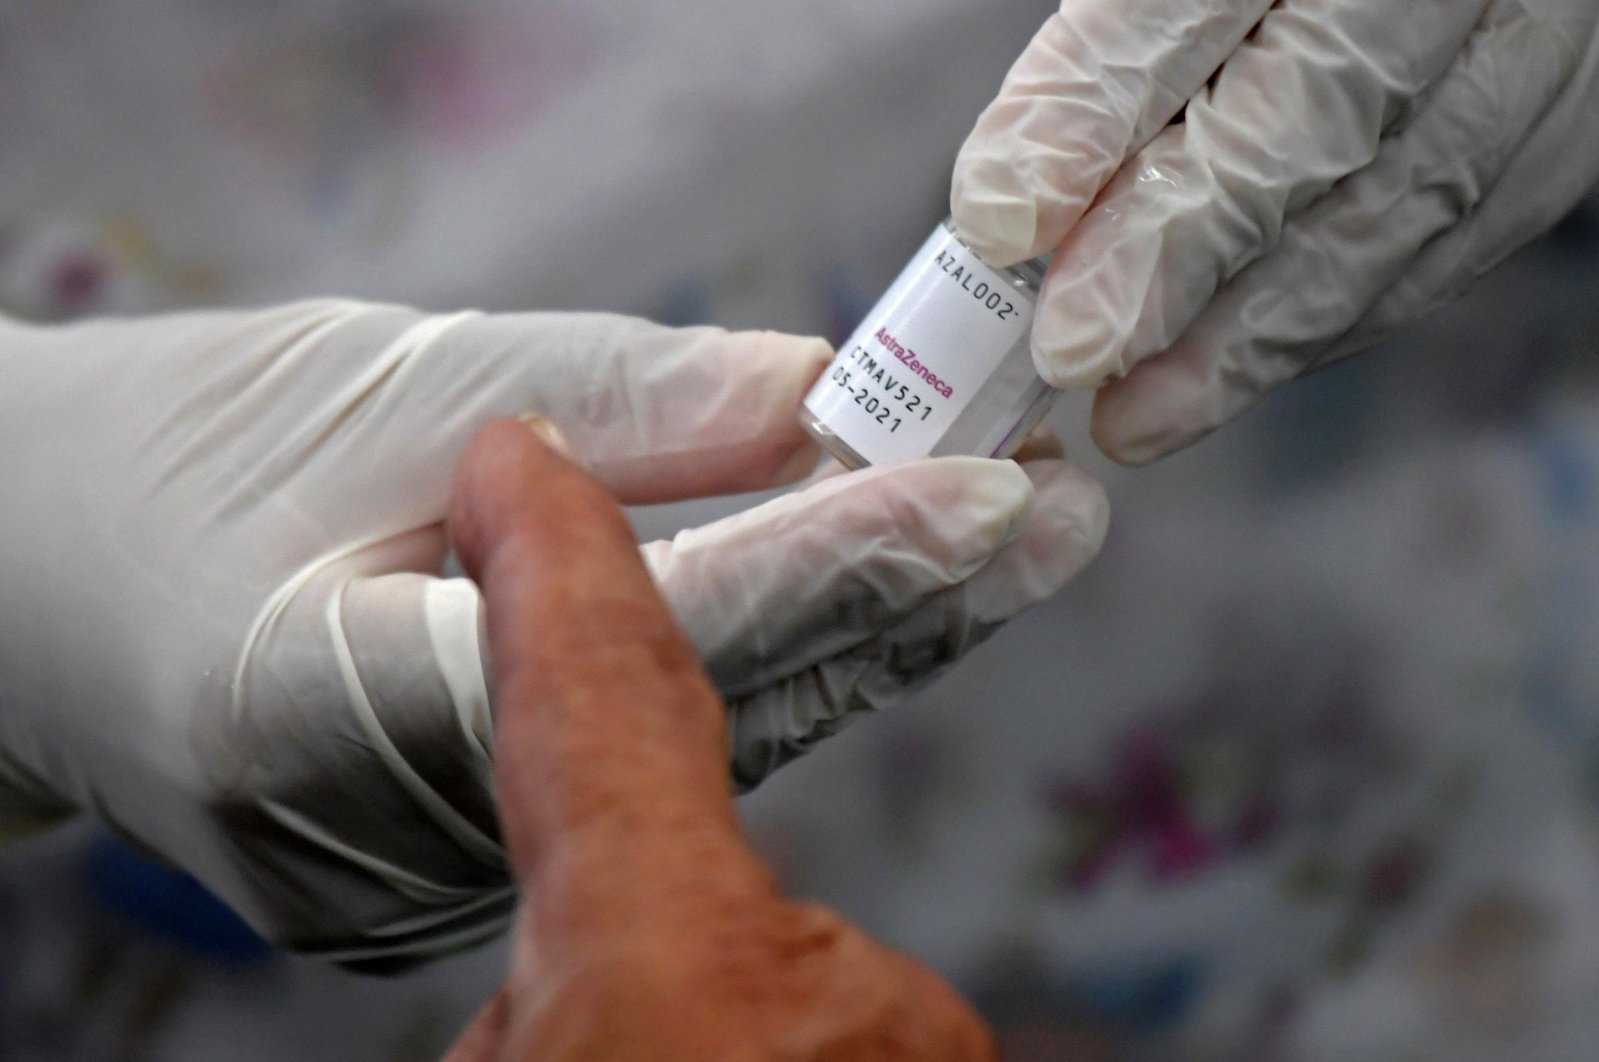 A health worker prepares an Oxford/AstraZeneca vaccine against COVID-19 as people wait amid the coronavirus pandemic, Bogota, Colombia April 7, 2021. (Photo by Raul ARBOLEDA / AFP)